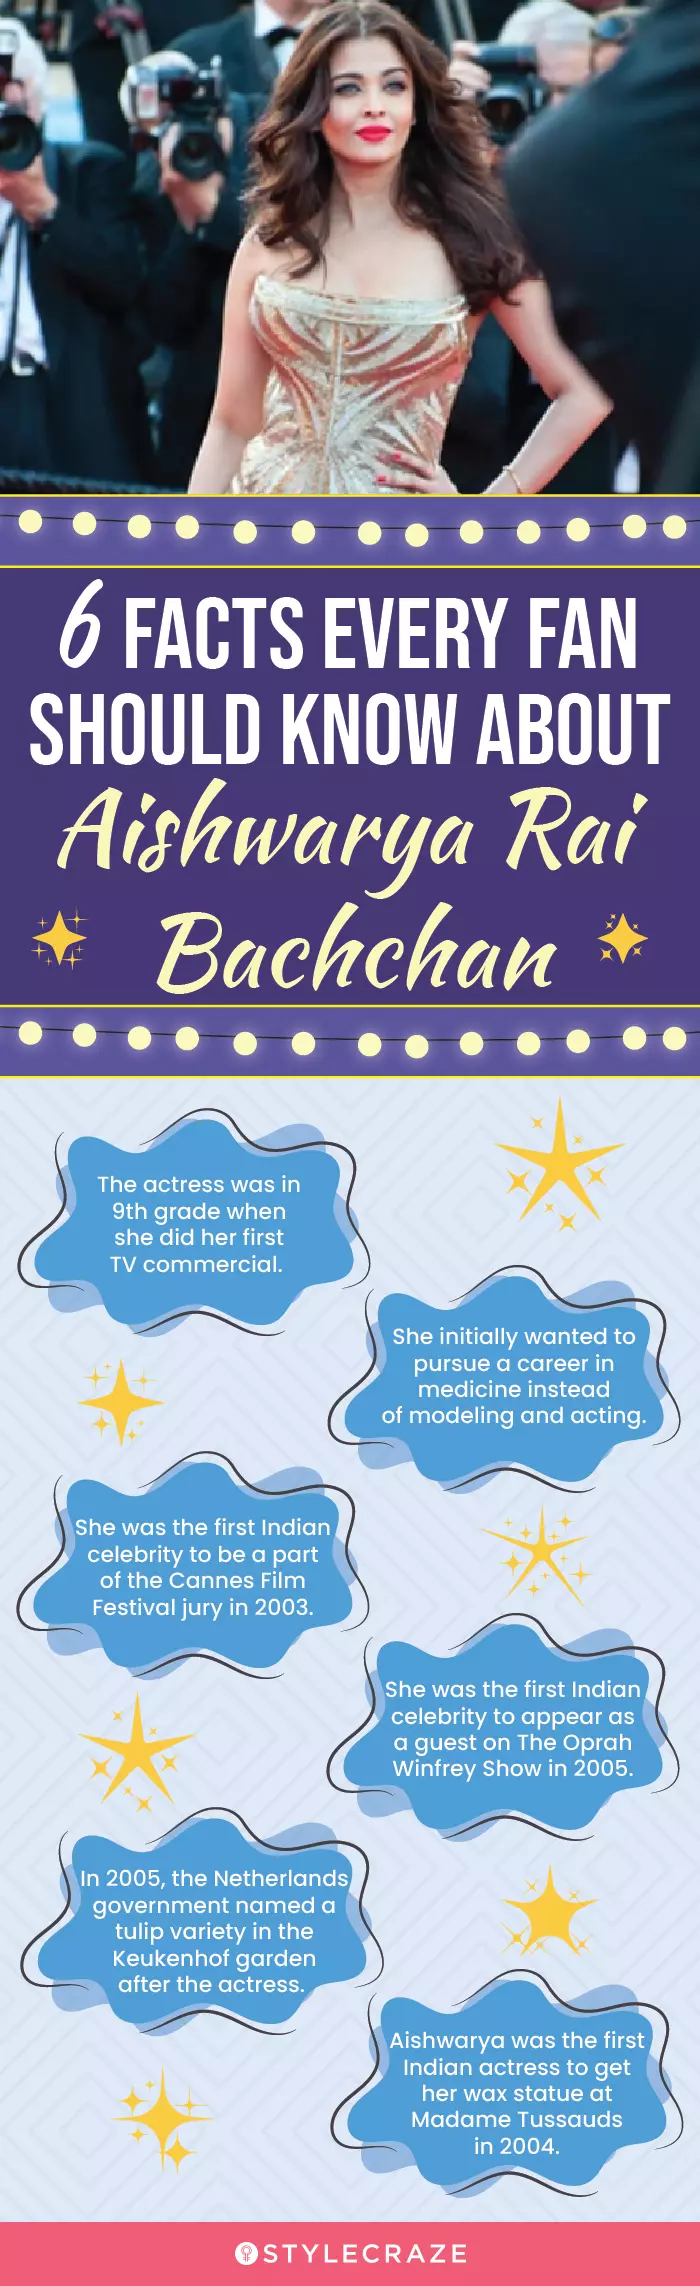 6 facts every fan should know about aishwarya rai bachchan(infographic)